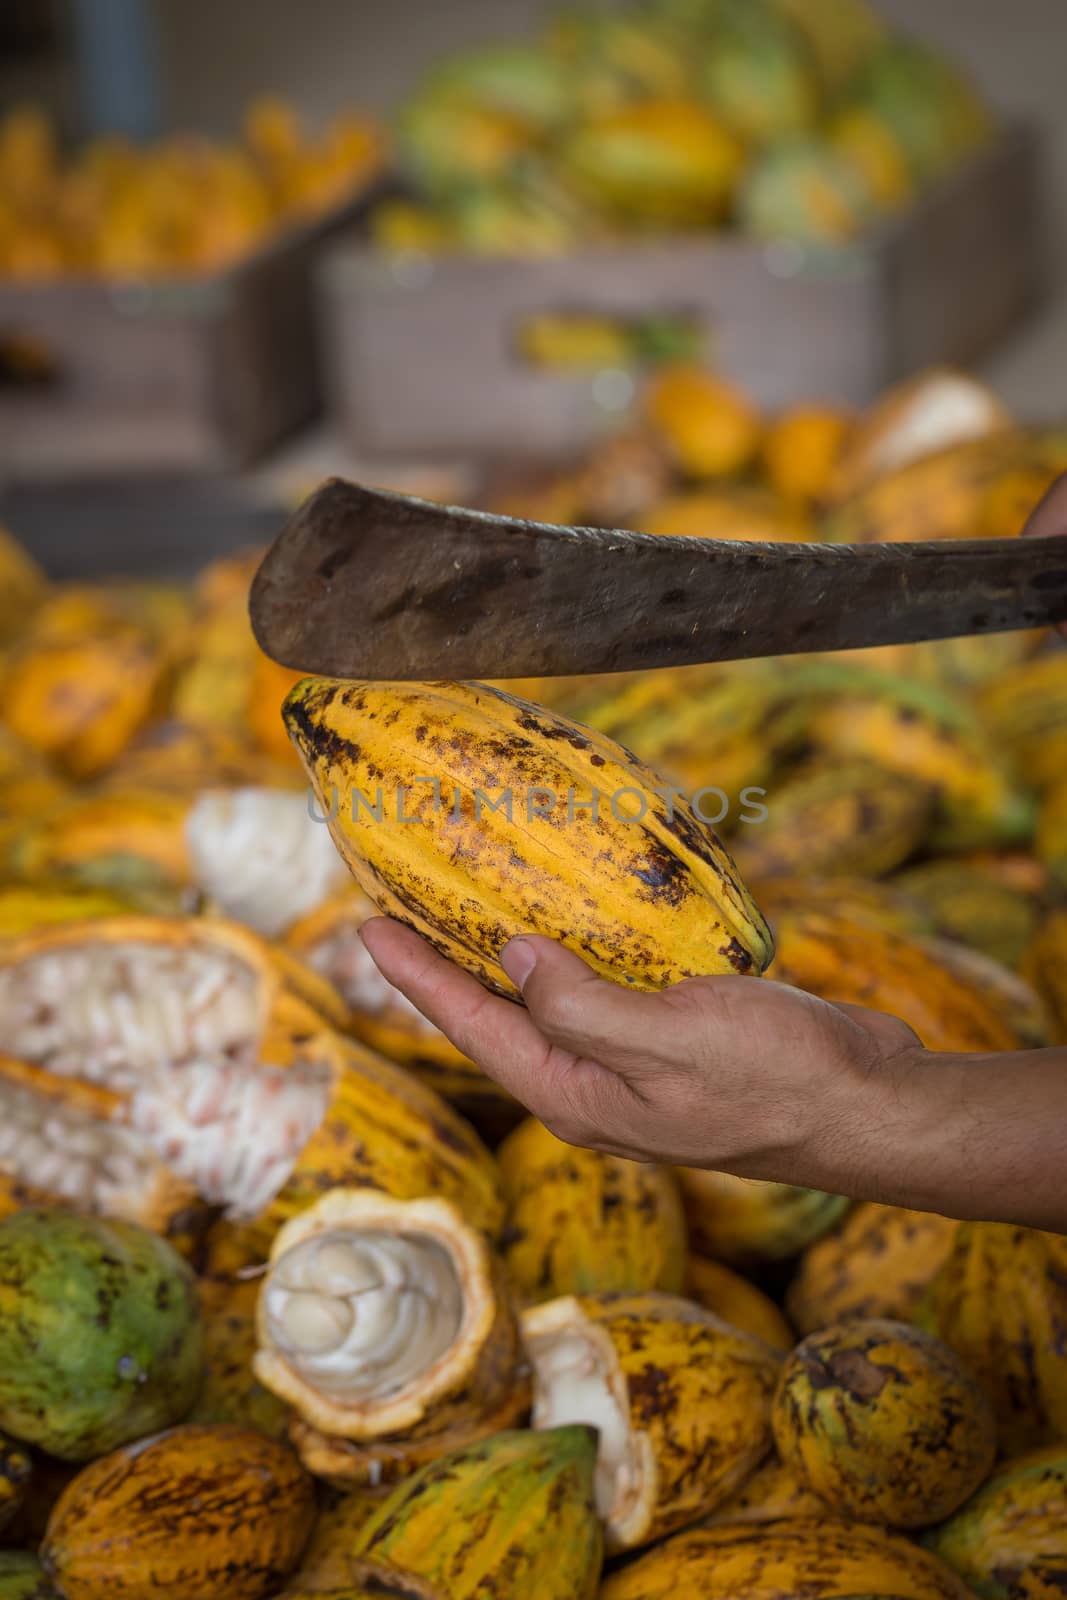 Cacao pod cut open to show cacao beans inside in Thailand by kaiskynet